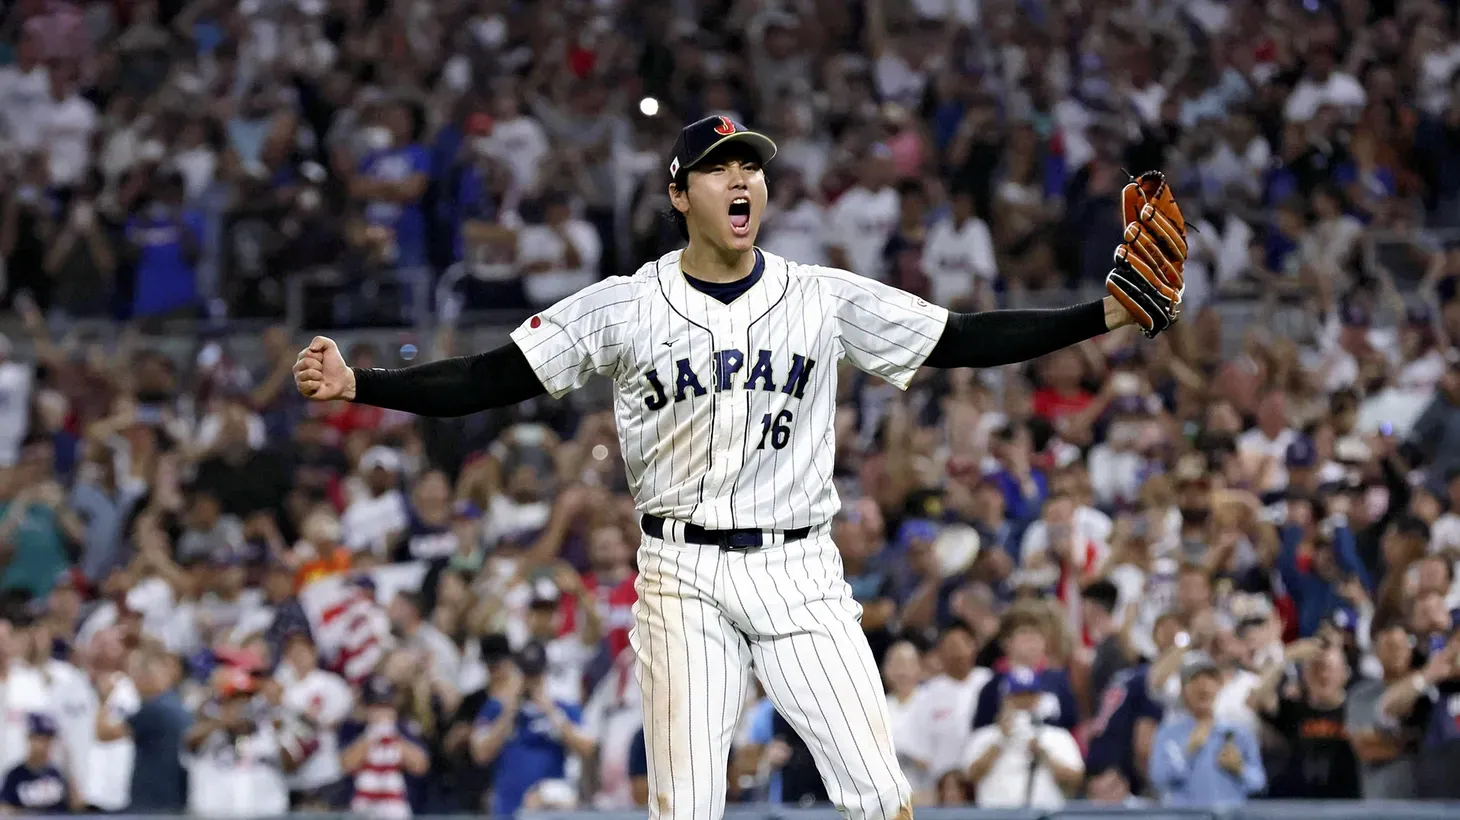 Shohei Ohtani of Japan reacts after winning the World Baseball Classic final match against the United States at LoanDepot Park in Miami, Florida, March 21, 2023. Ohtani of the Los Angeles Angels agreed to a contract with the Los Angeles Dodgers via a free agent.